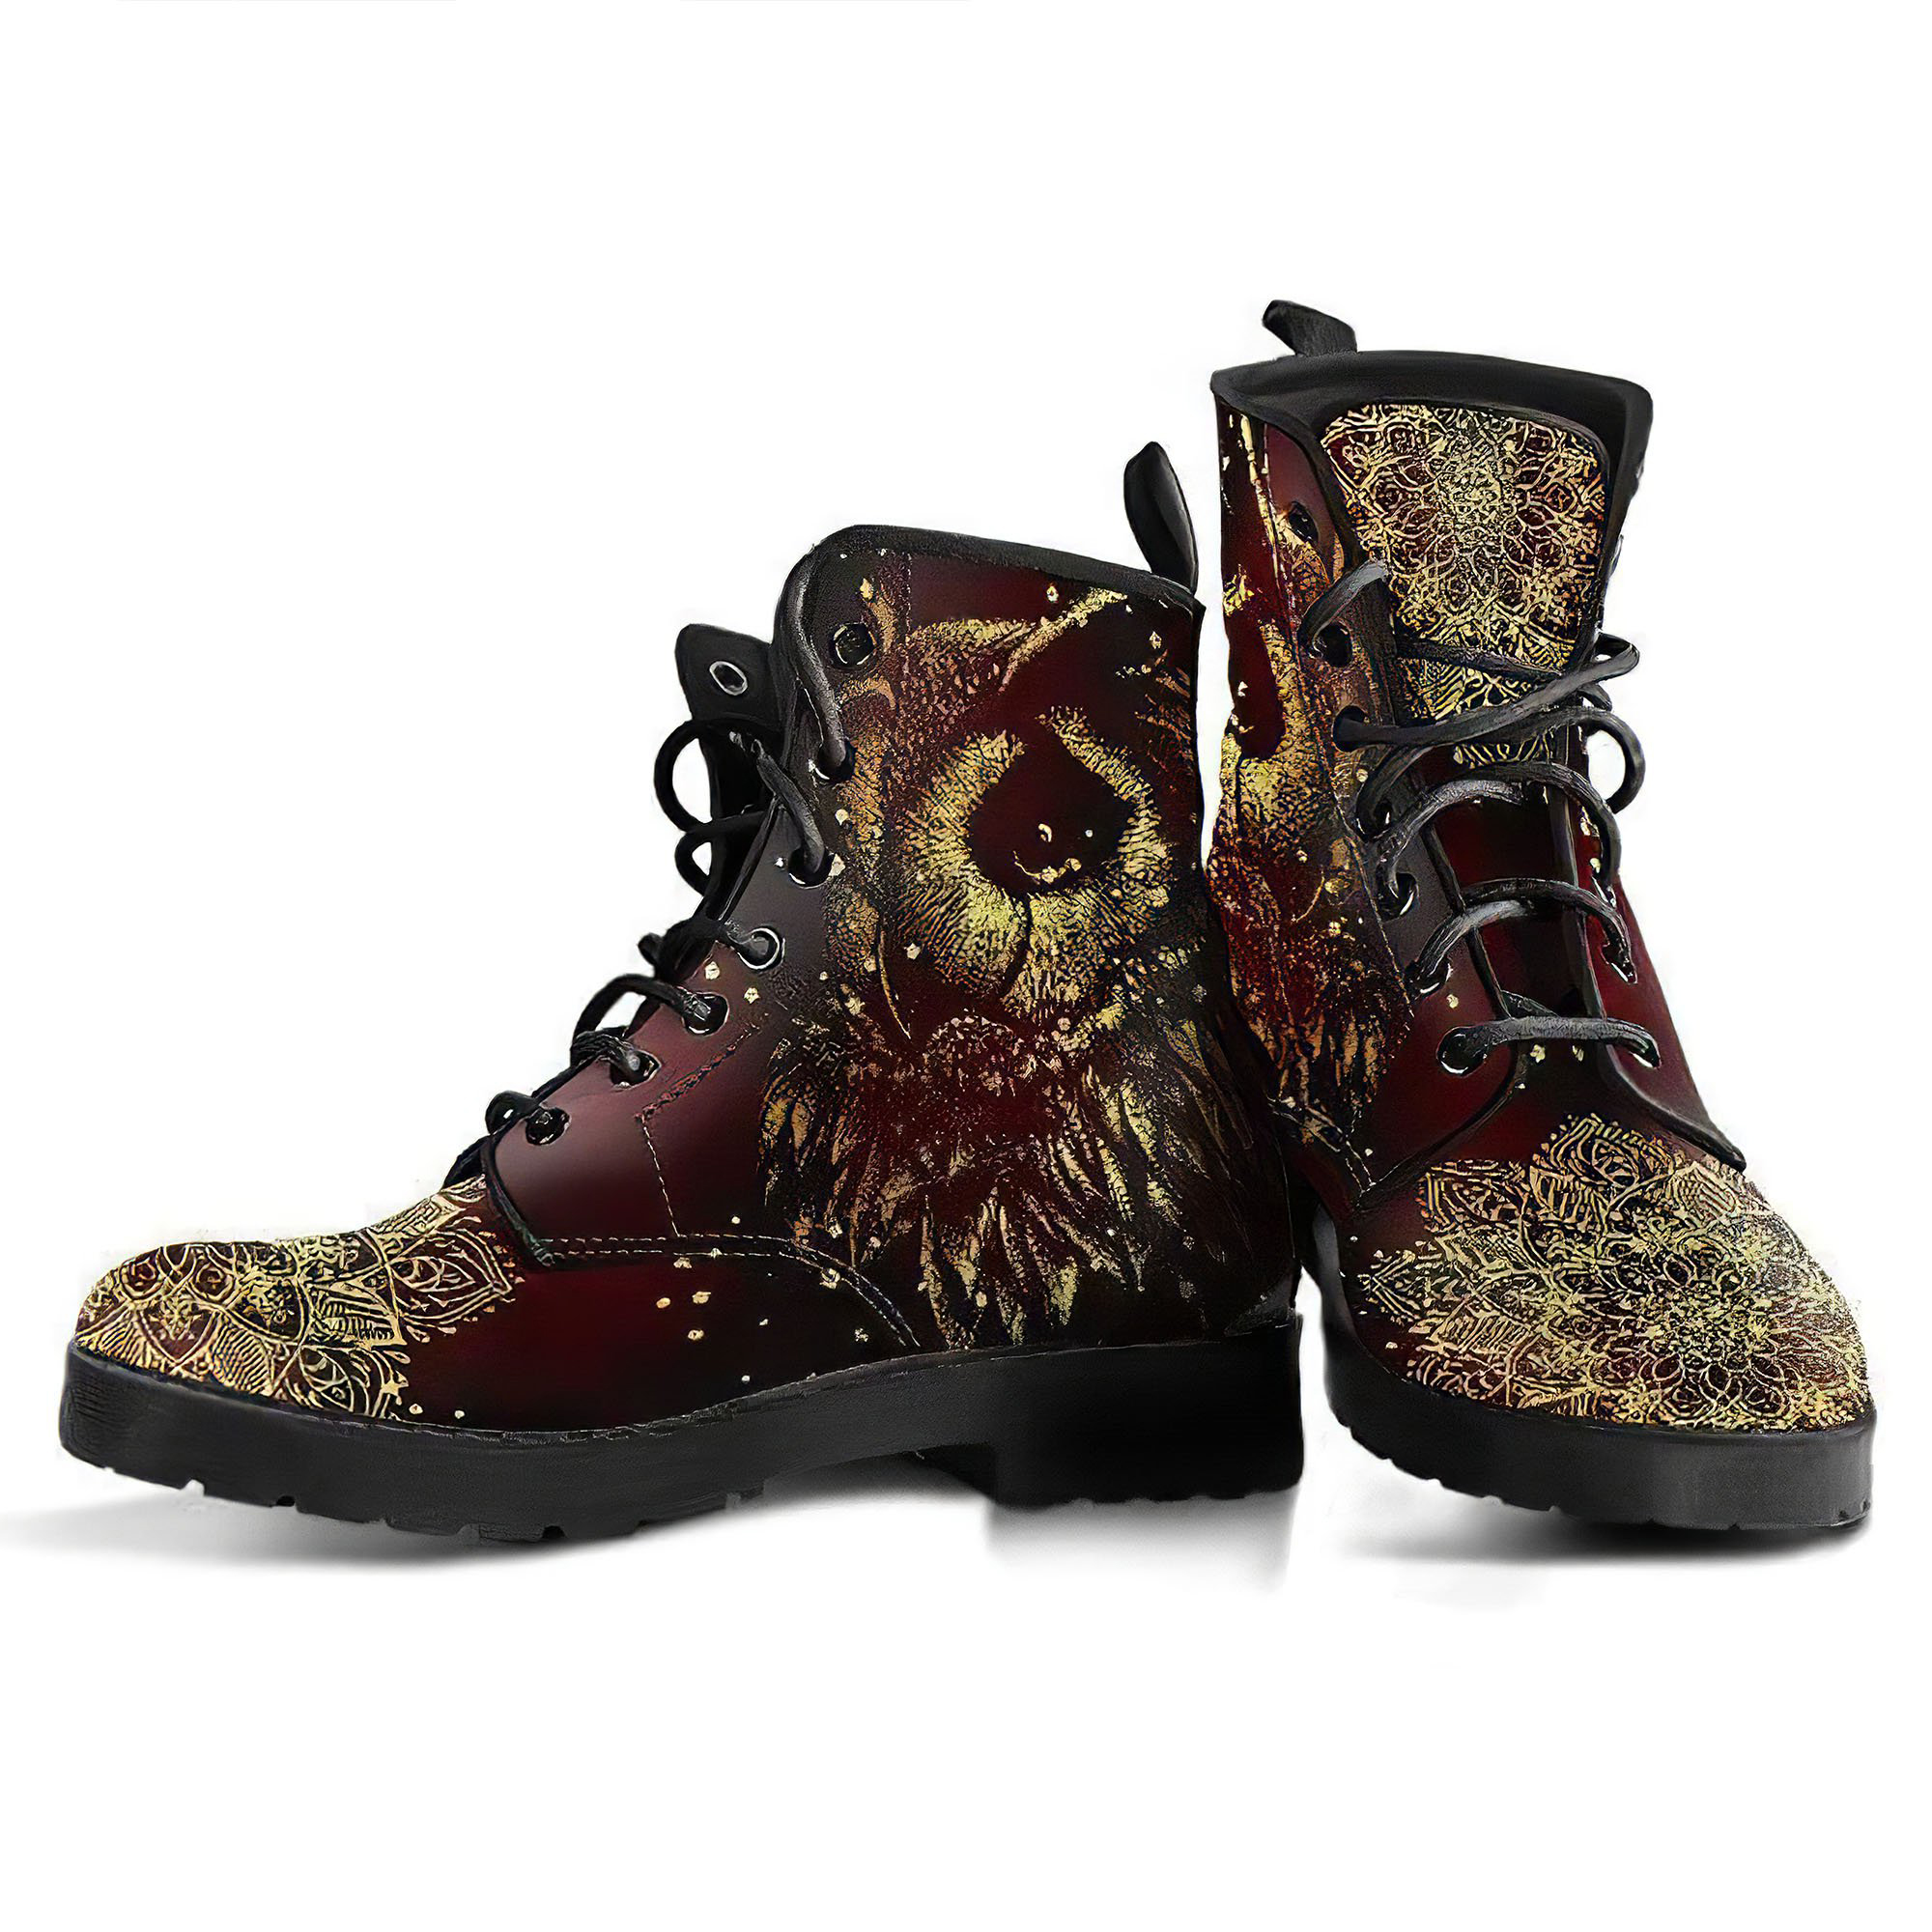 owl-4-handcrafted-boots-gp-main.jpg